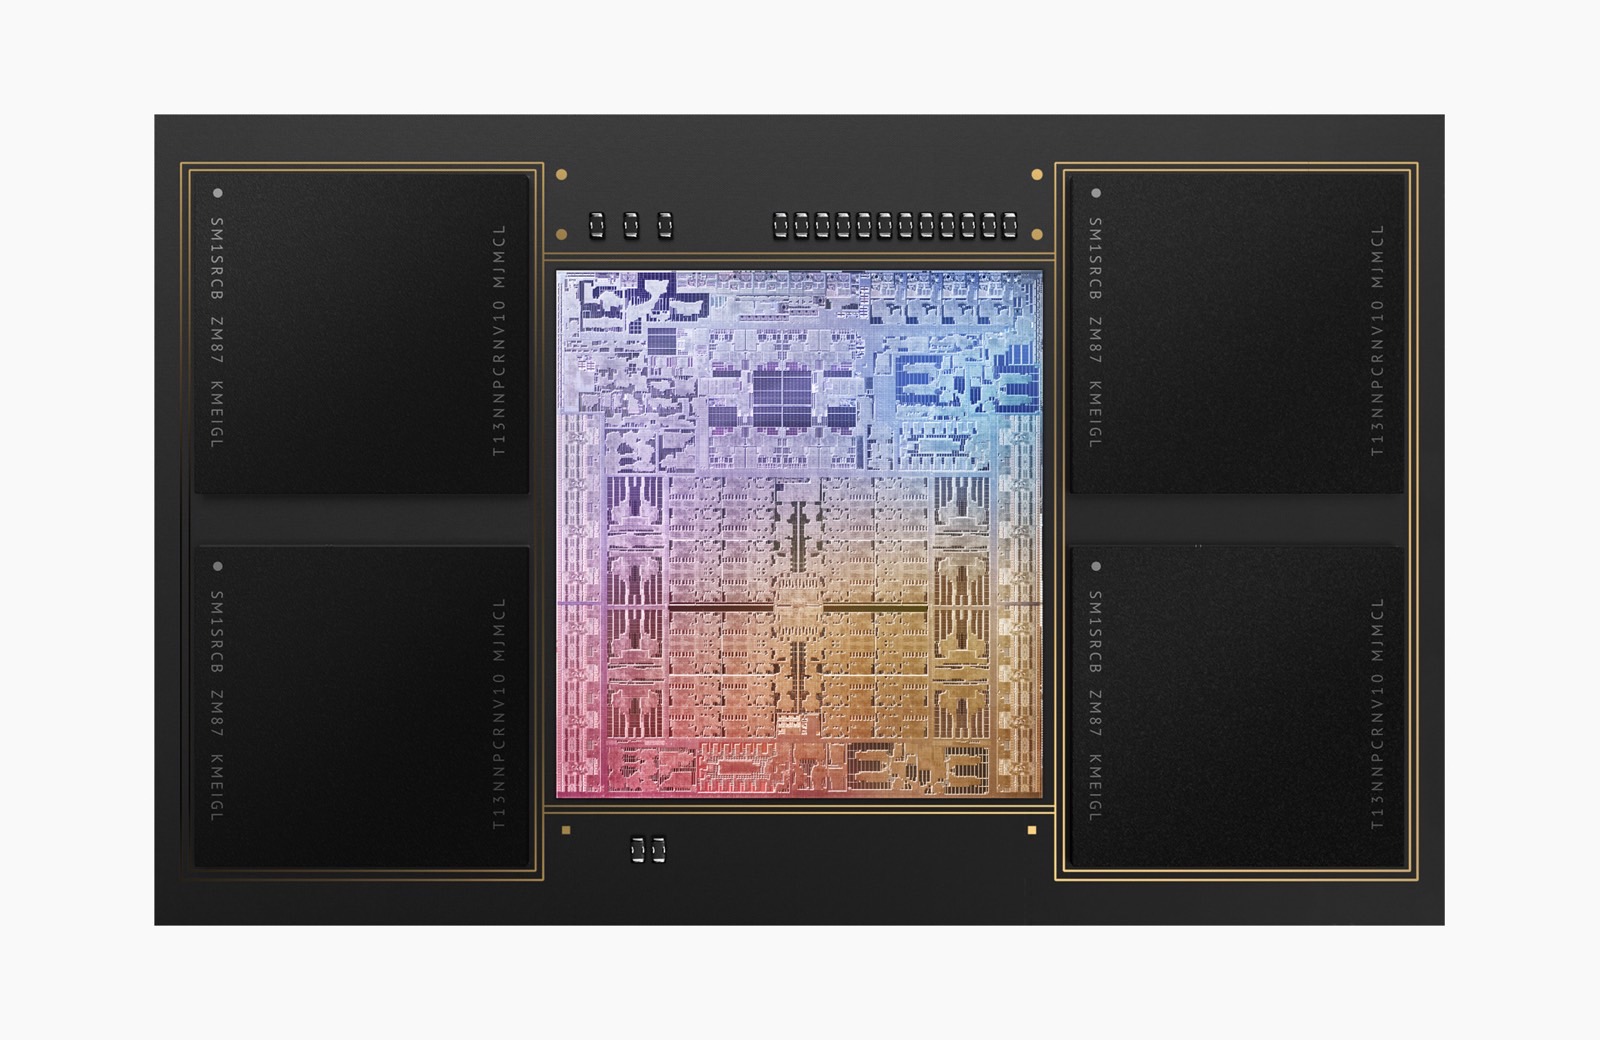 Apple M1 Max efficiency destroys the competition in novel benchmarks